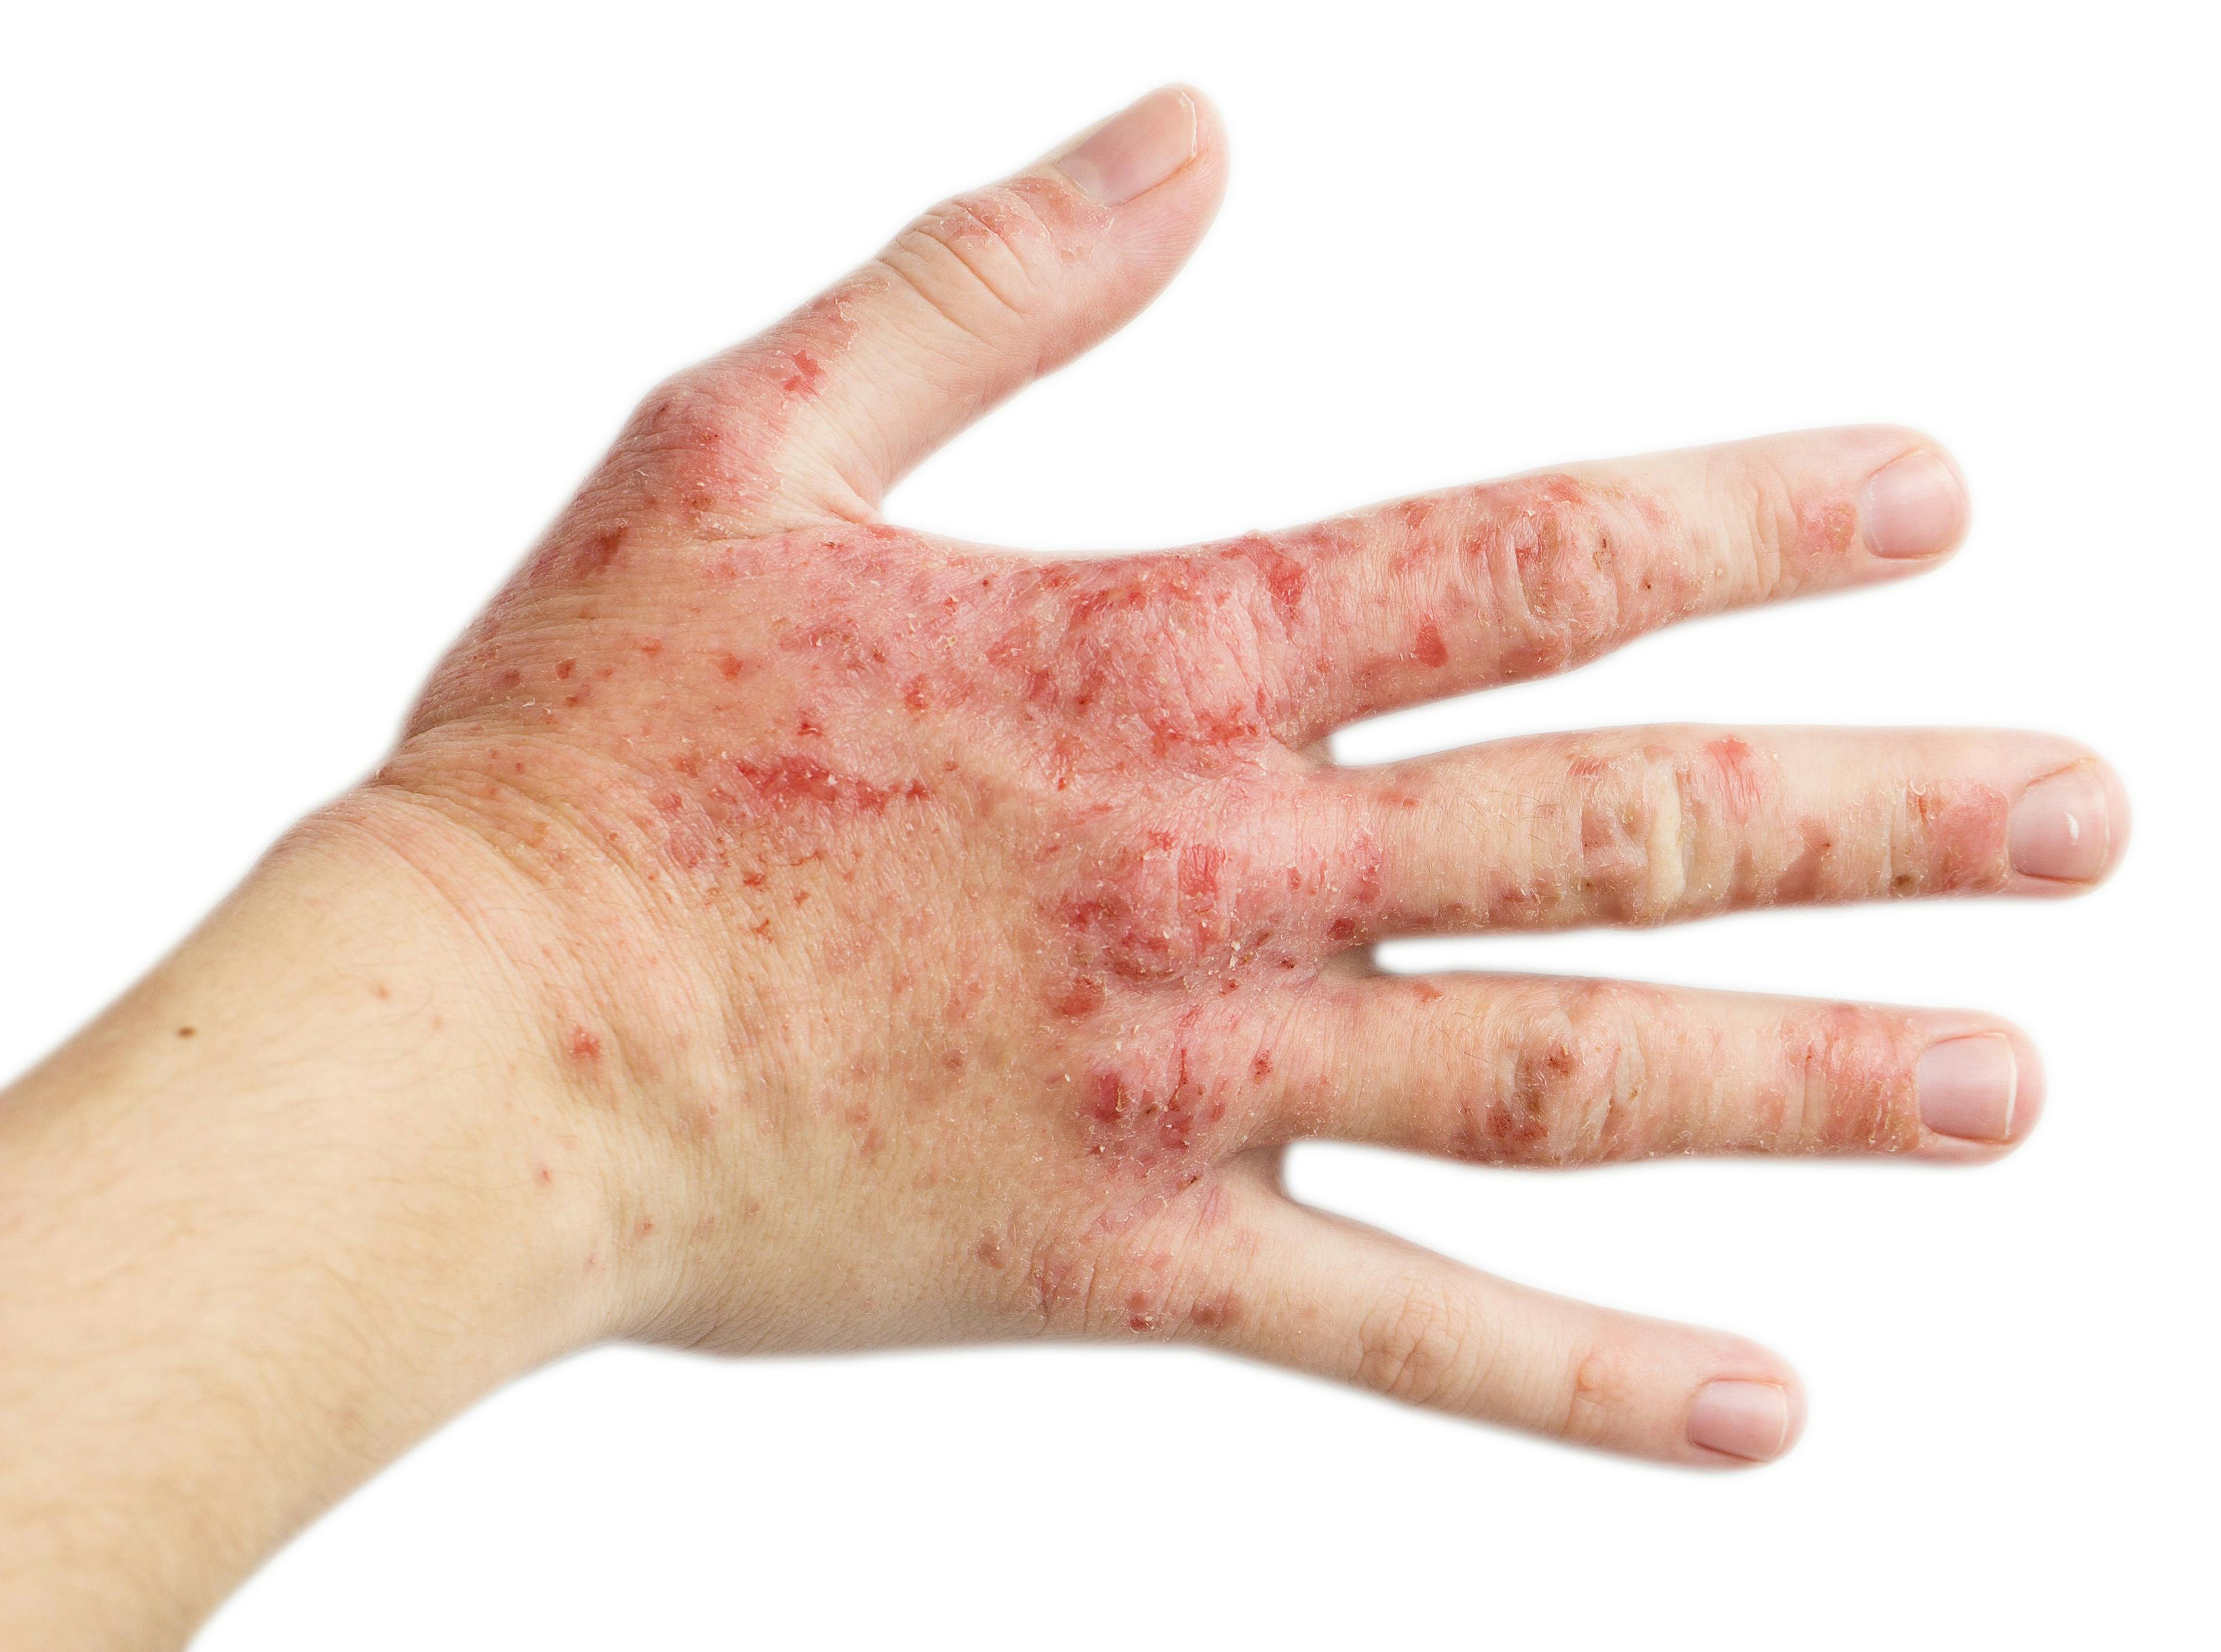 Upadacitinib Approved for Moderate to Severe Atopic Dermatitis